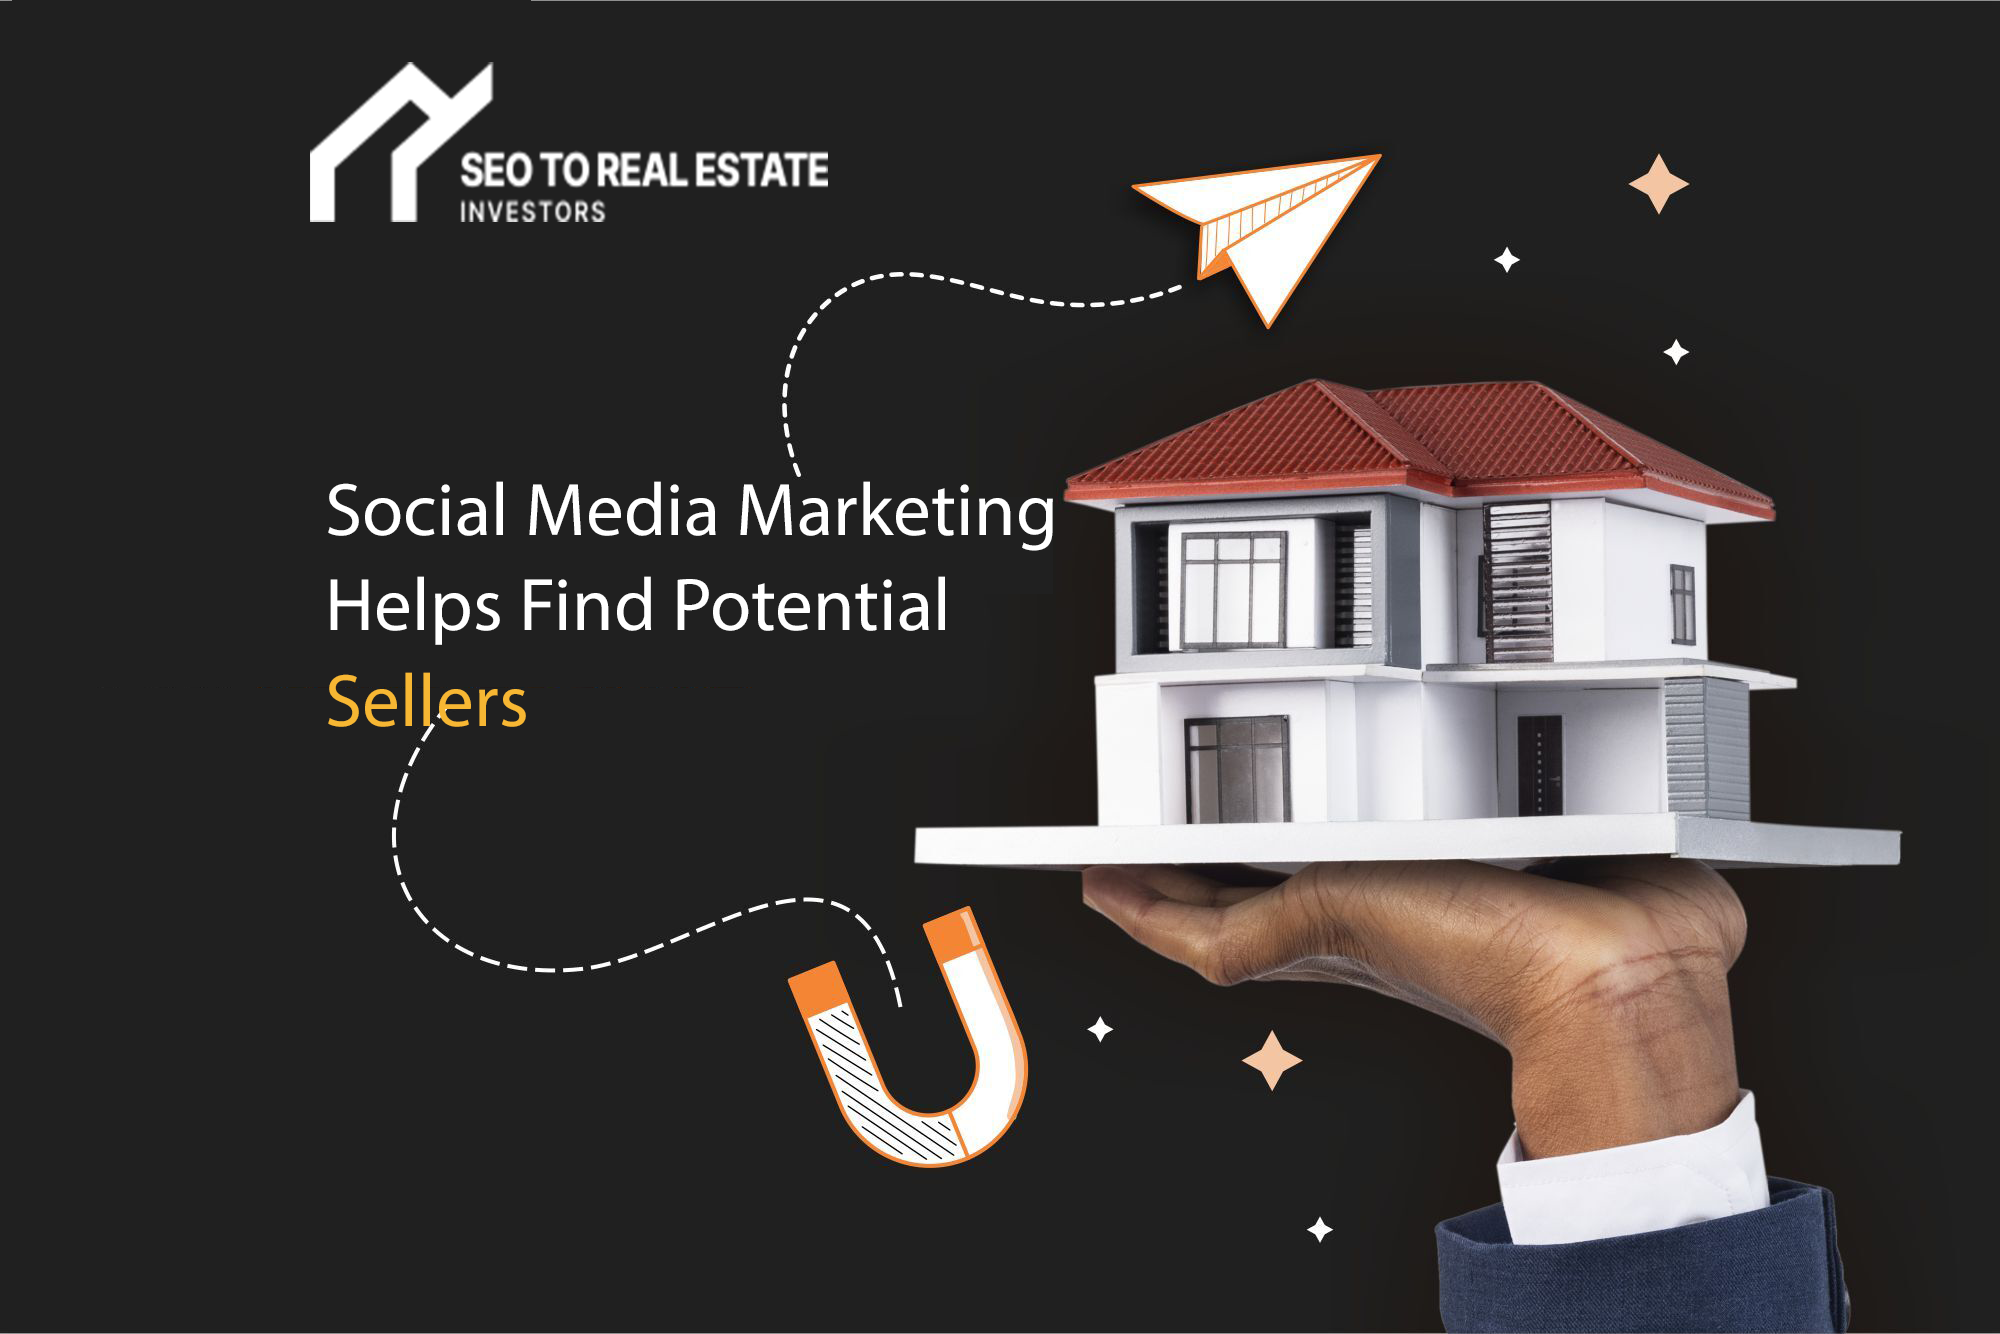 How Social Media Marketing Helps Find Potential Sellers